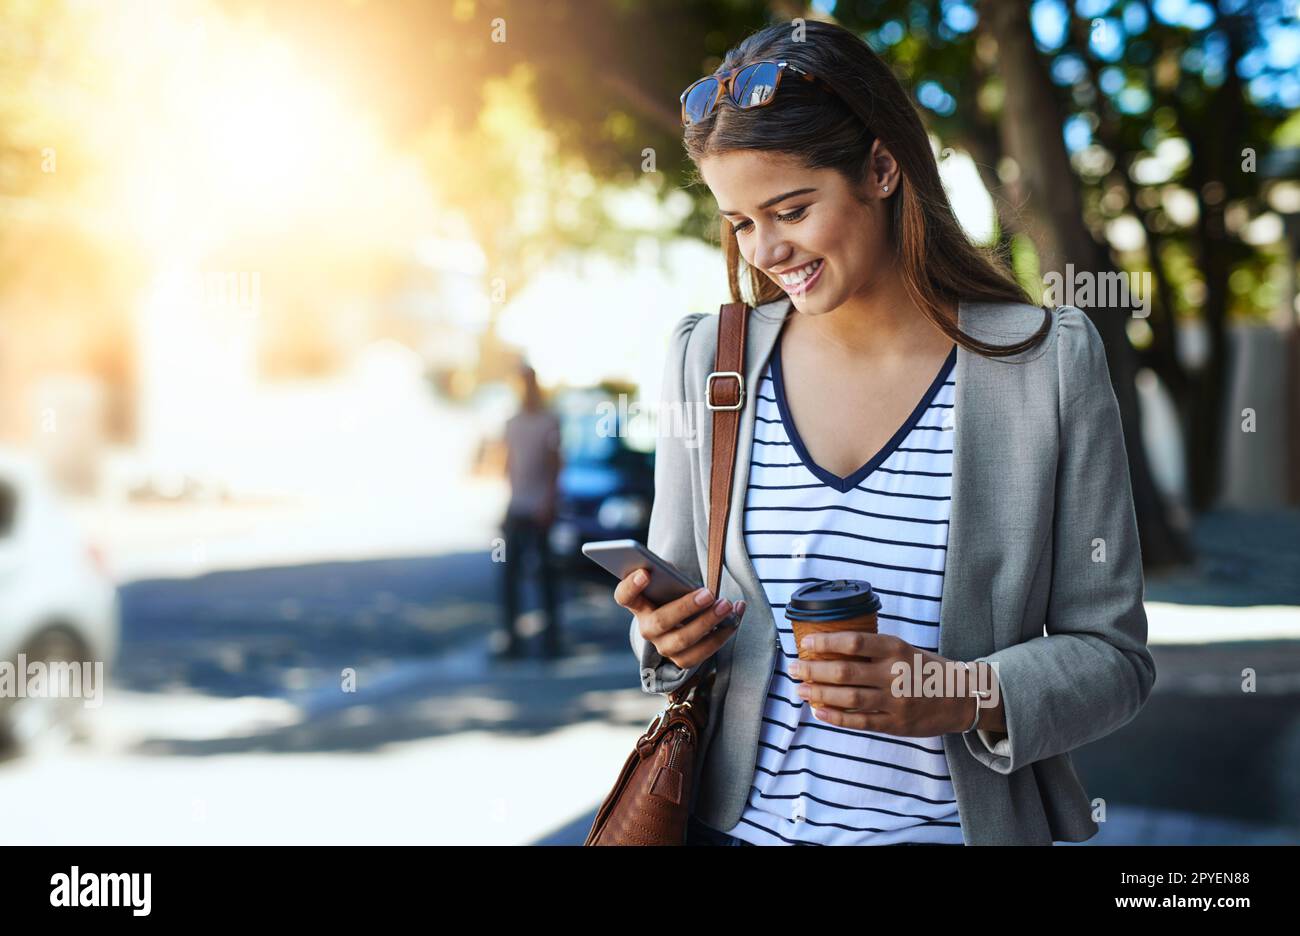 Shes always available to colleagues and clients. an attractive young woman using her cellphone while commuting to work. Stock Photo